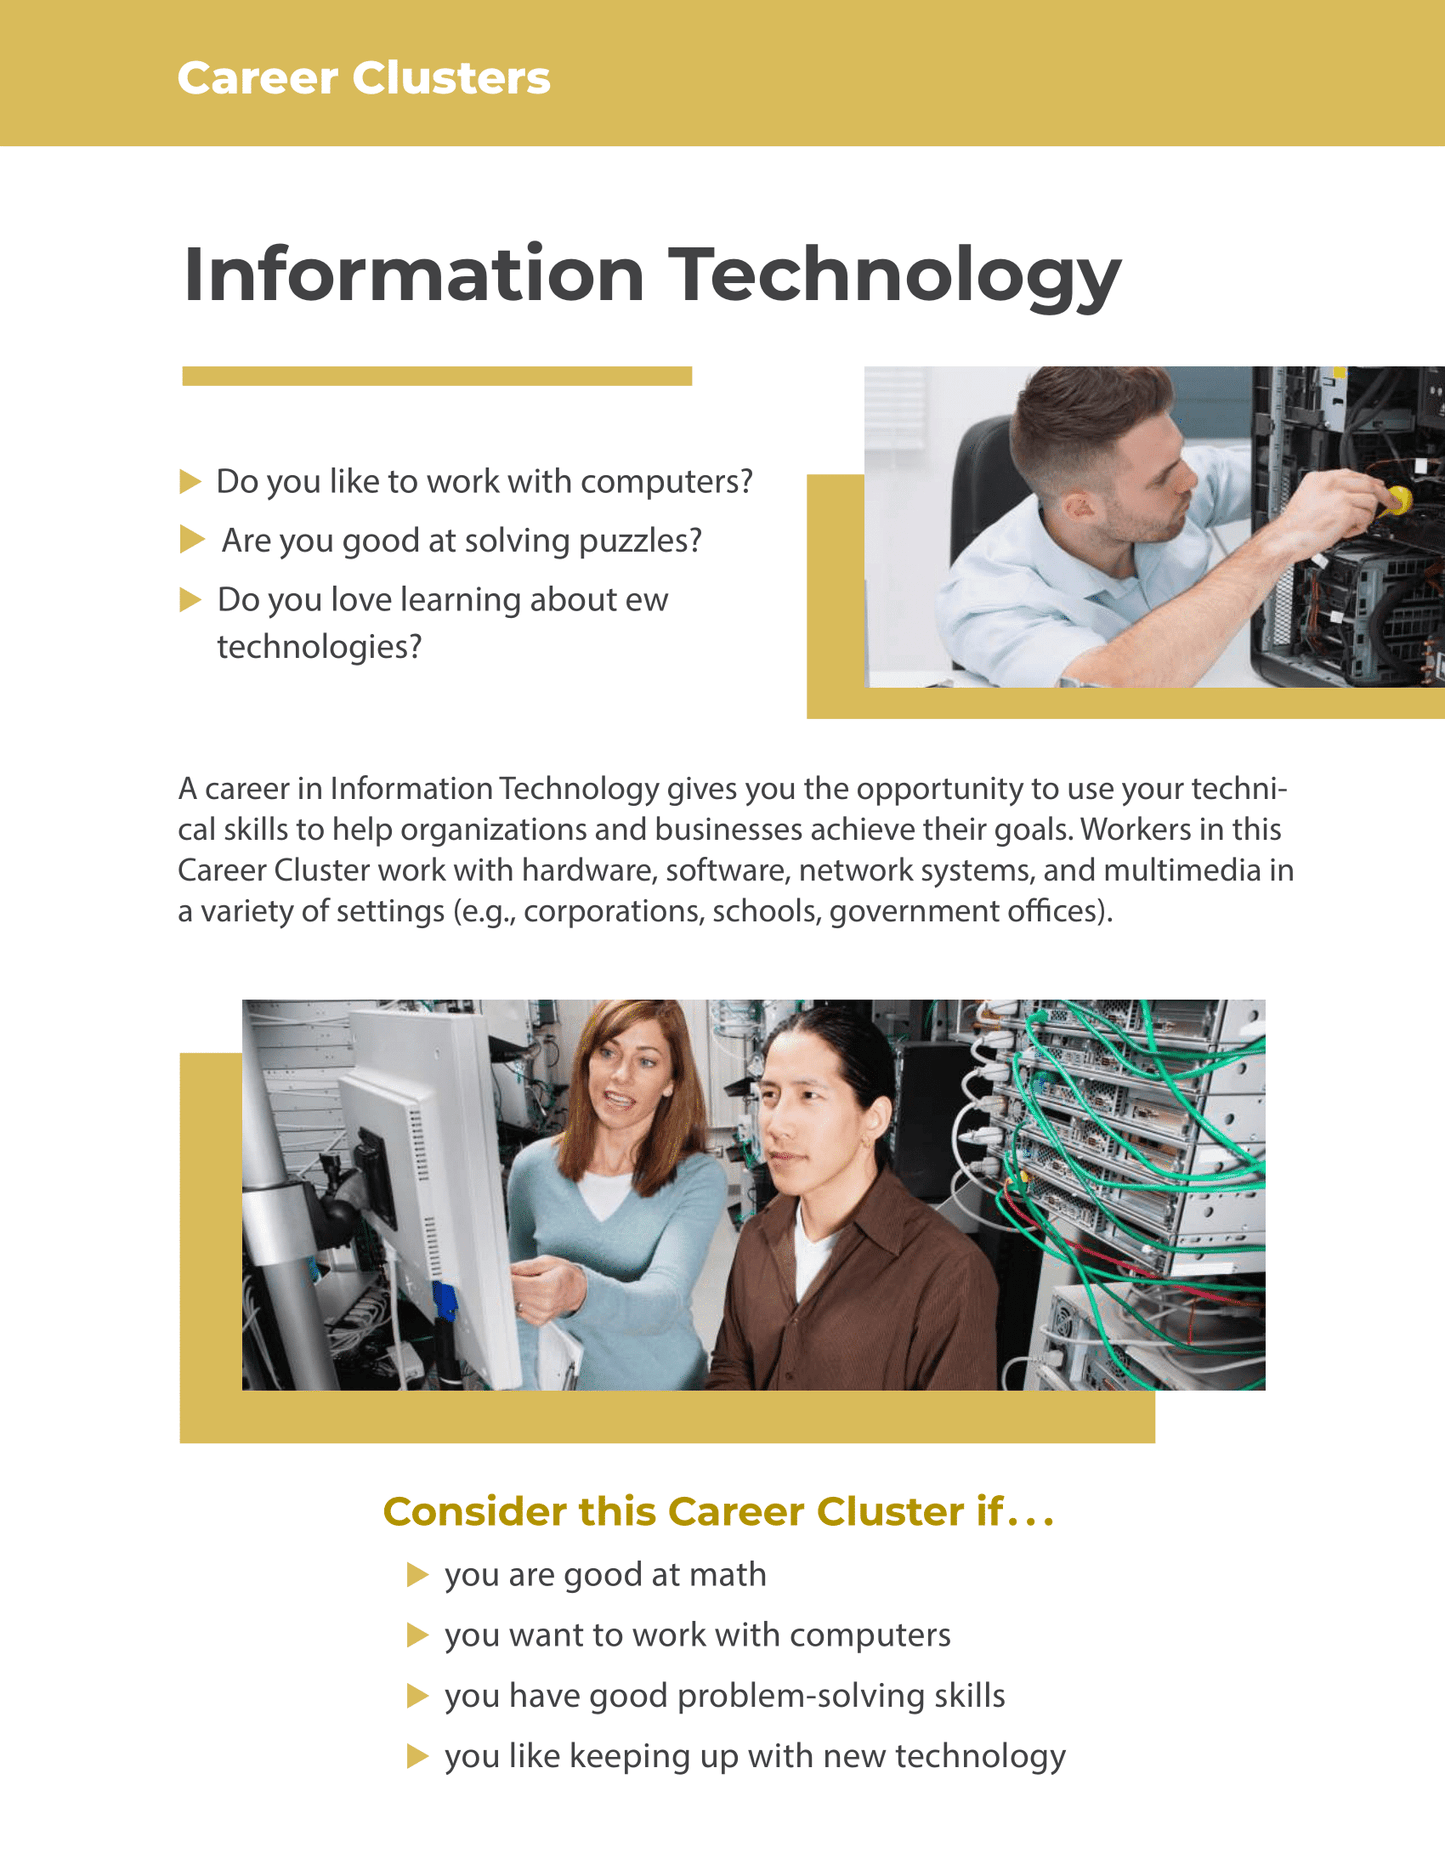 Career Clusters - Information Technology